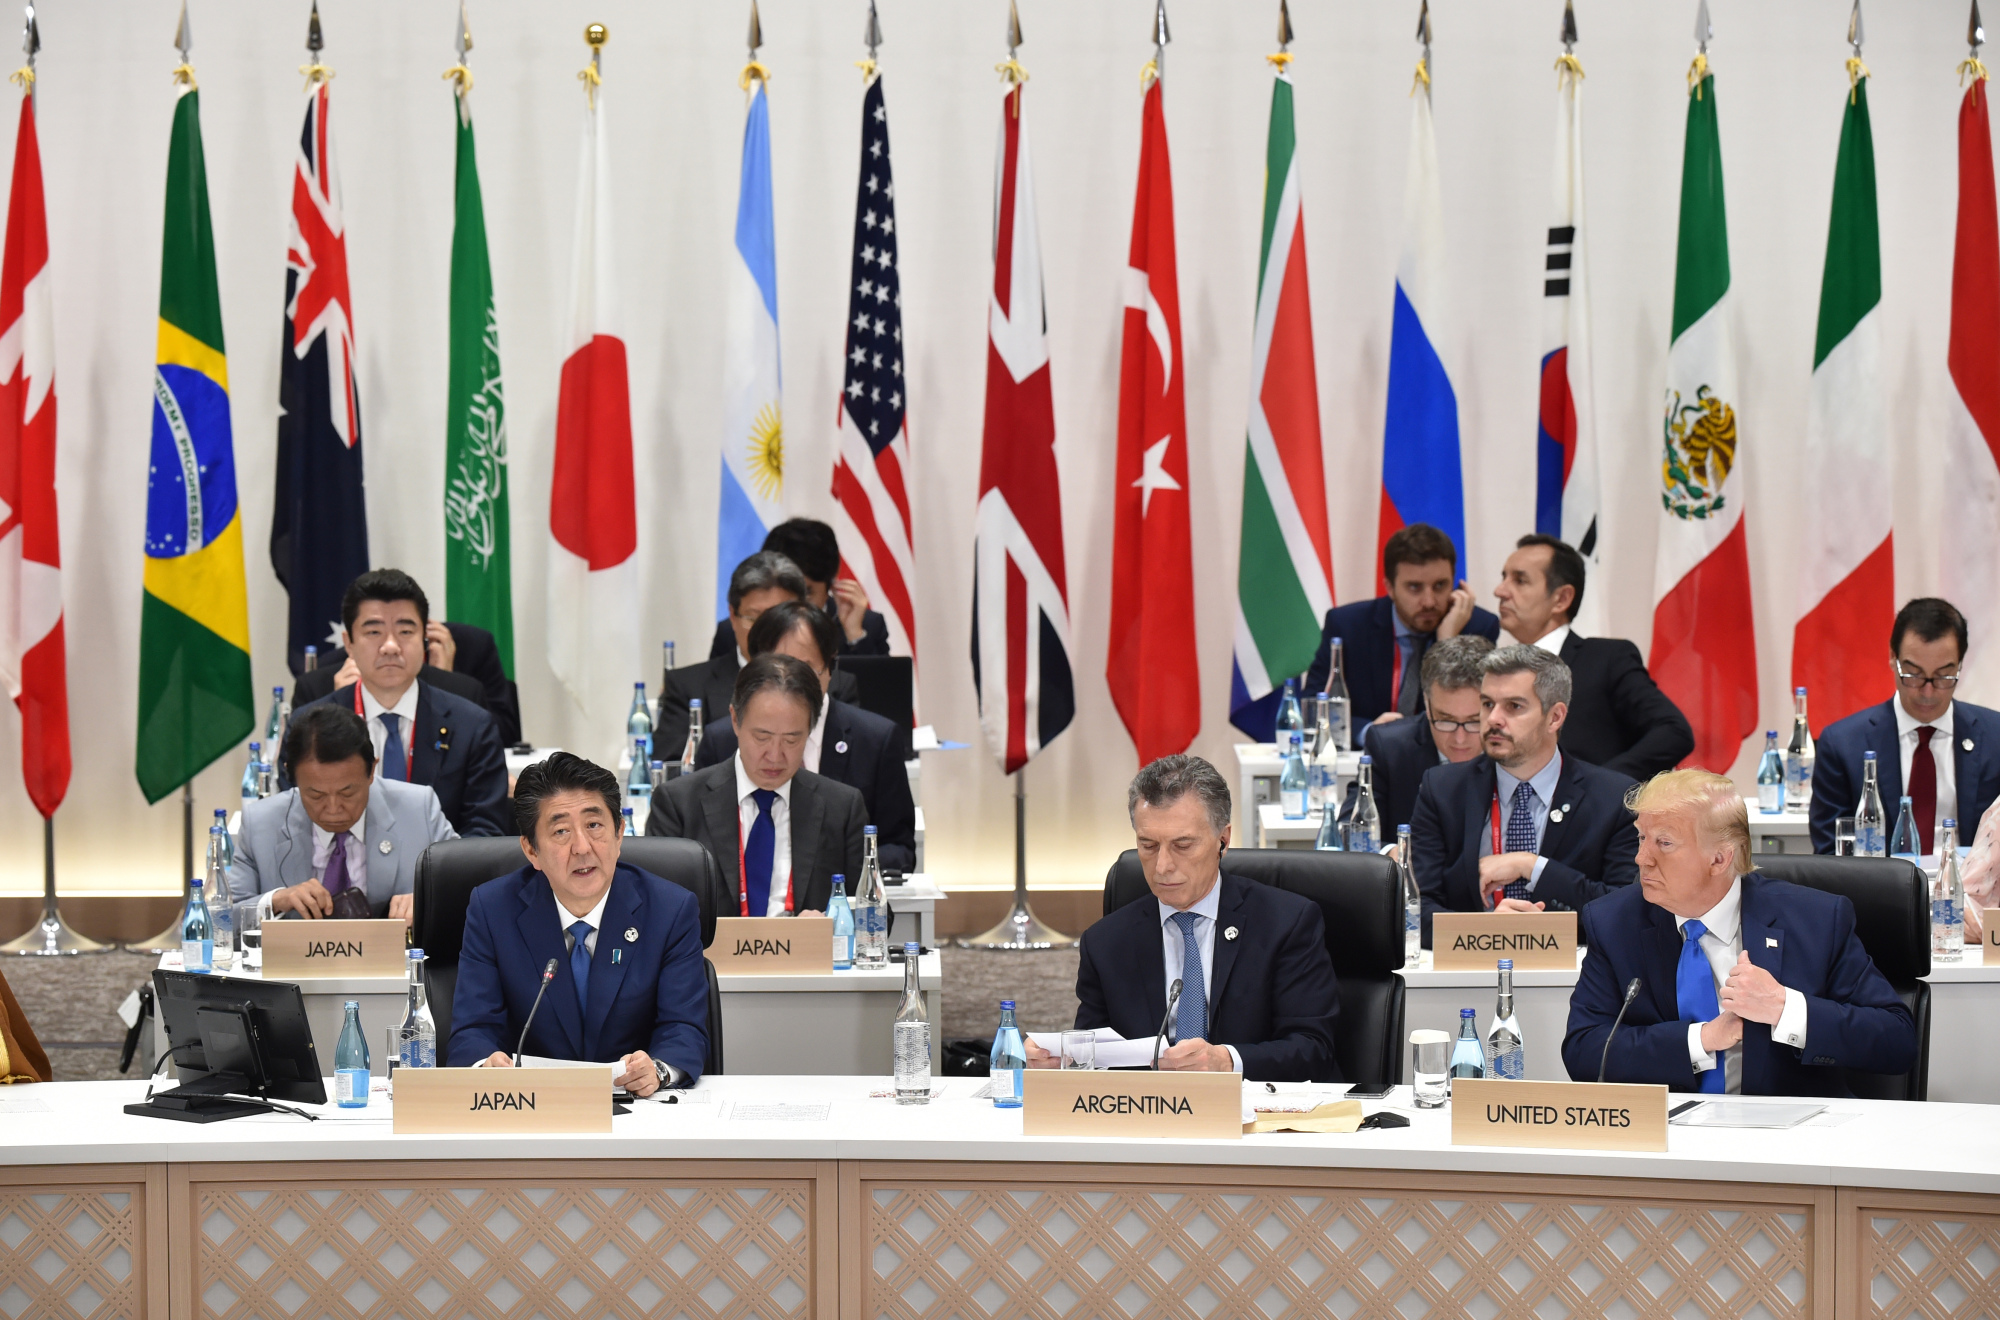 Prime Minister Shinzo Abe speaks as Mauricio Macri, president of Argentina, and U.S. President Donald Trump attend a session at the Group of 20 summit in Osaka on Saturday. | BLOOMBERG